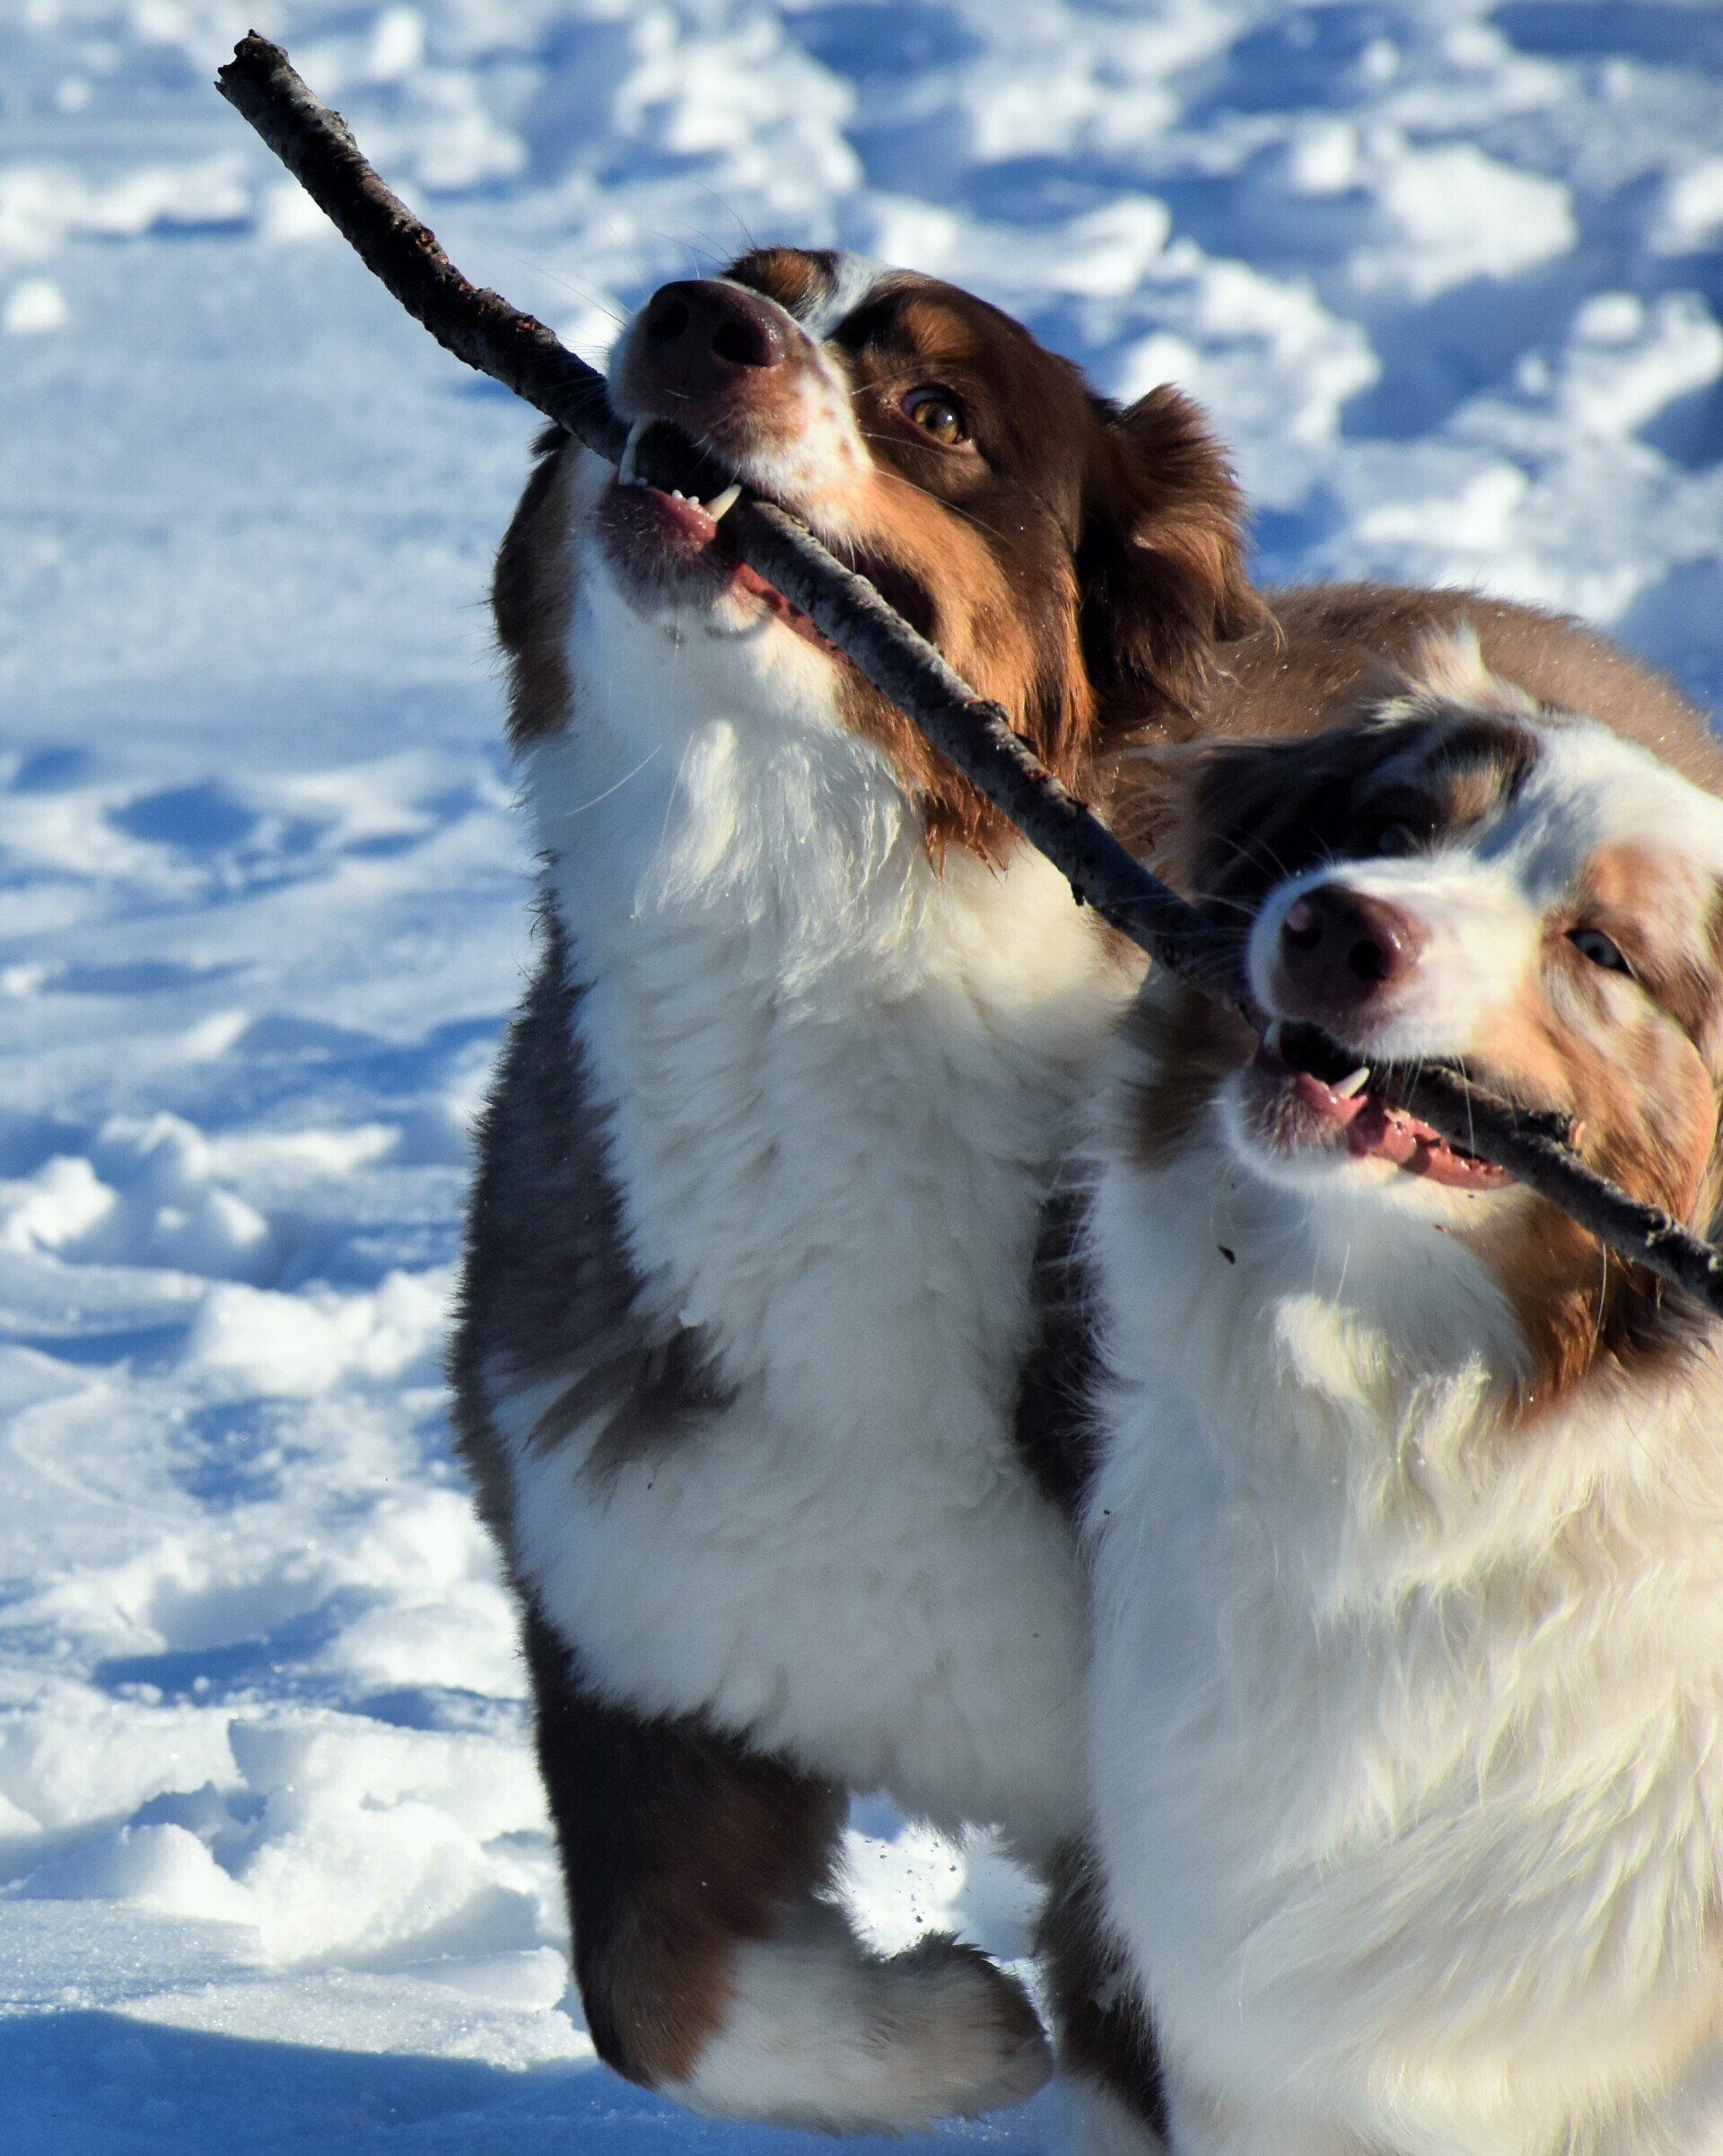 two dogs are playing with a stick in the snow